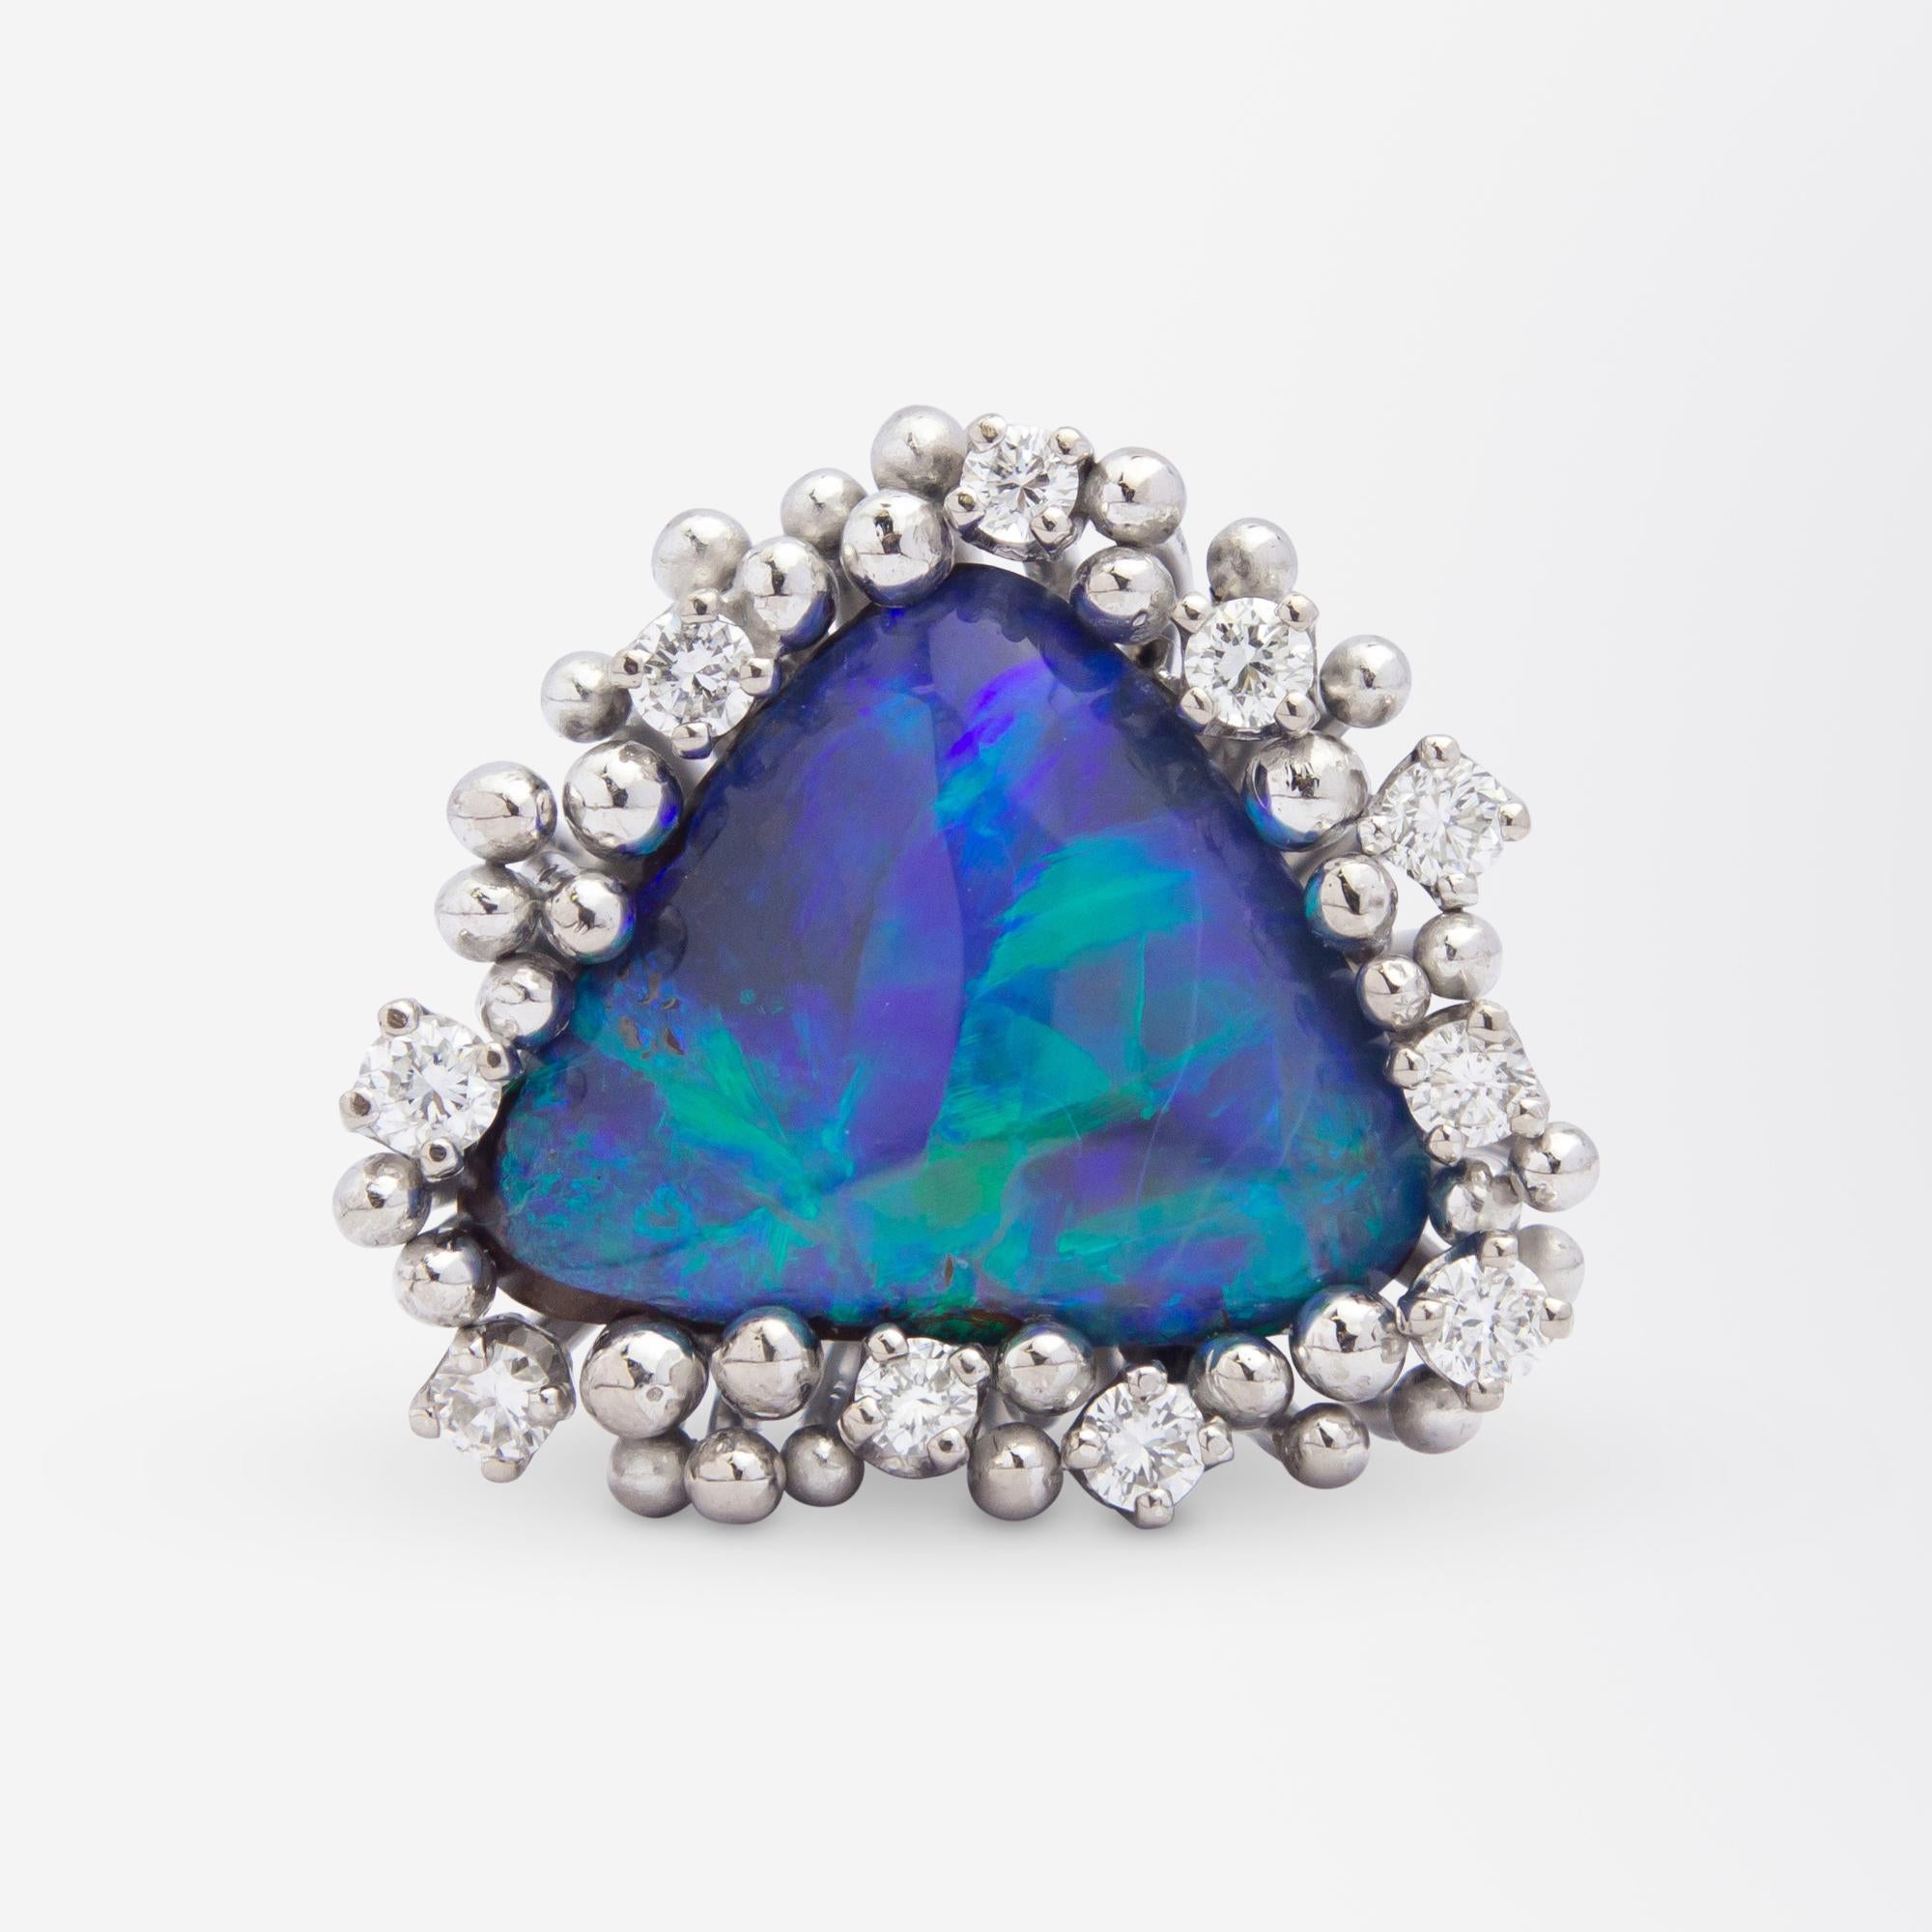 Modernist Grima Ring in 18 Karat White Gold With an Opal & Diamonds